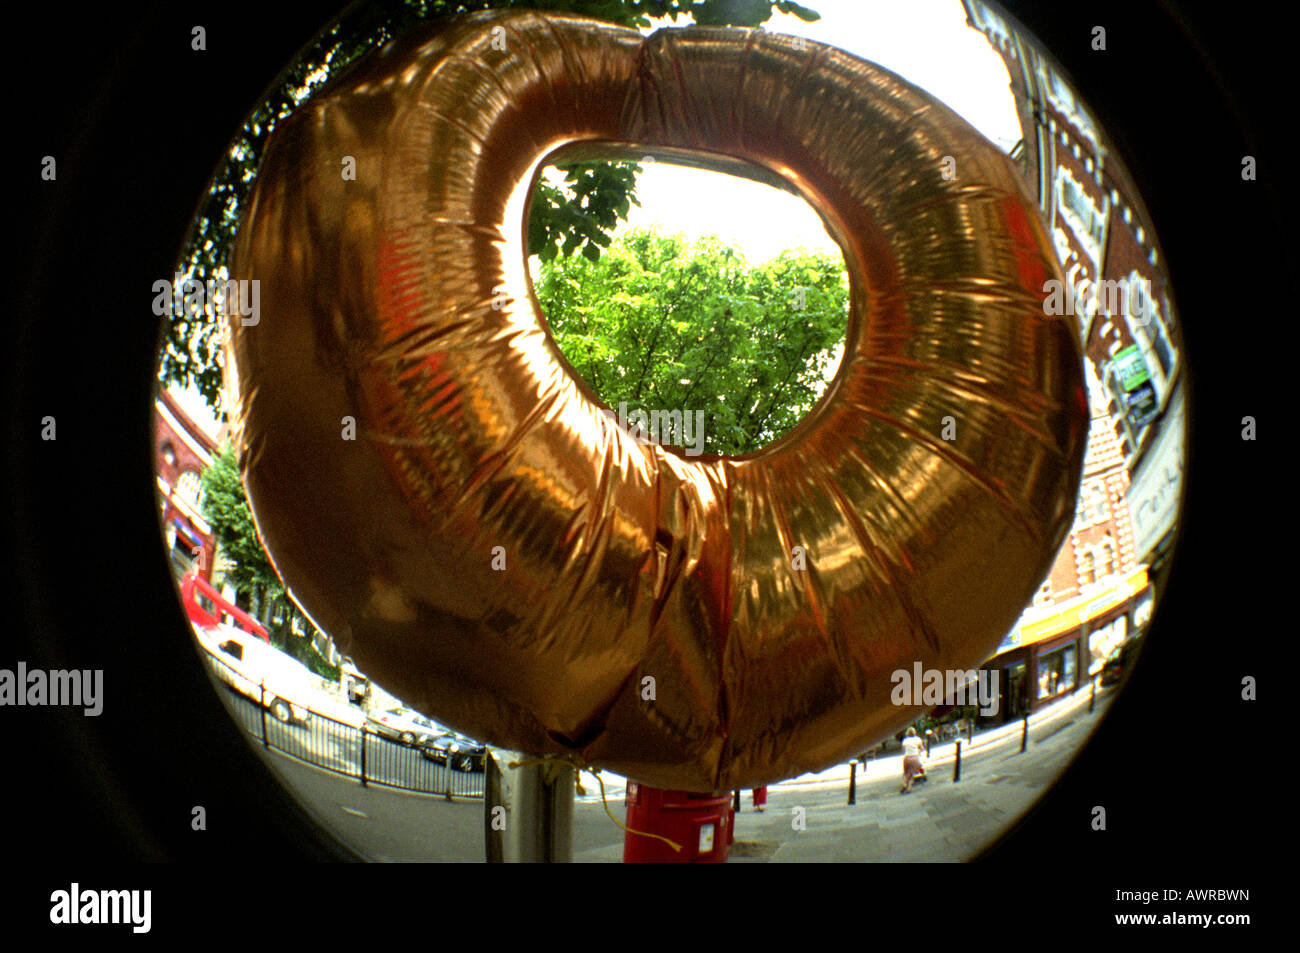 Giant inflatable doughnut on display in London high street Stock Photo